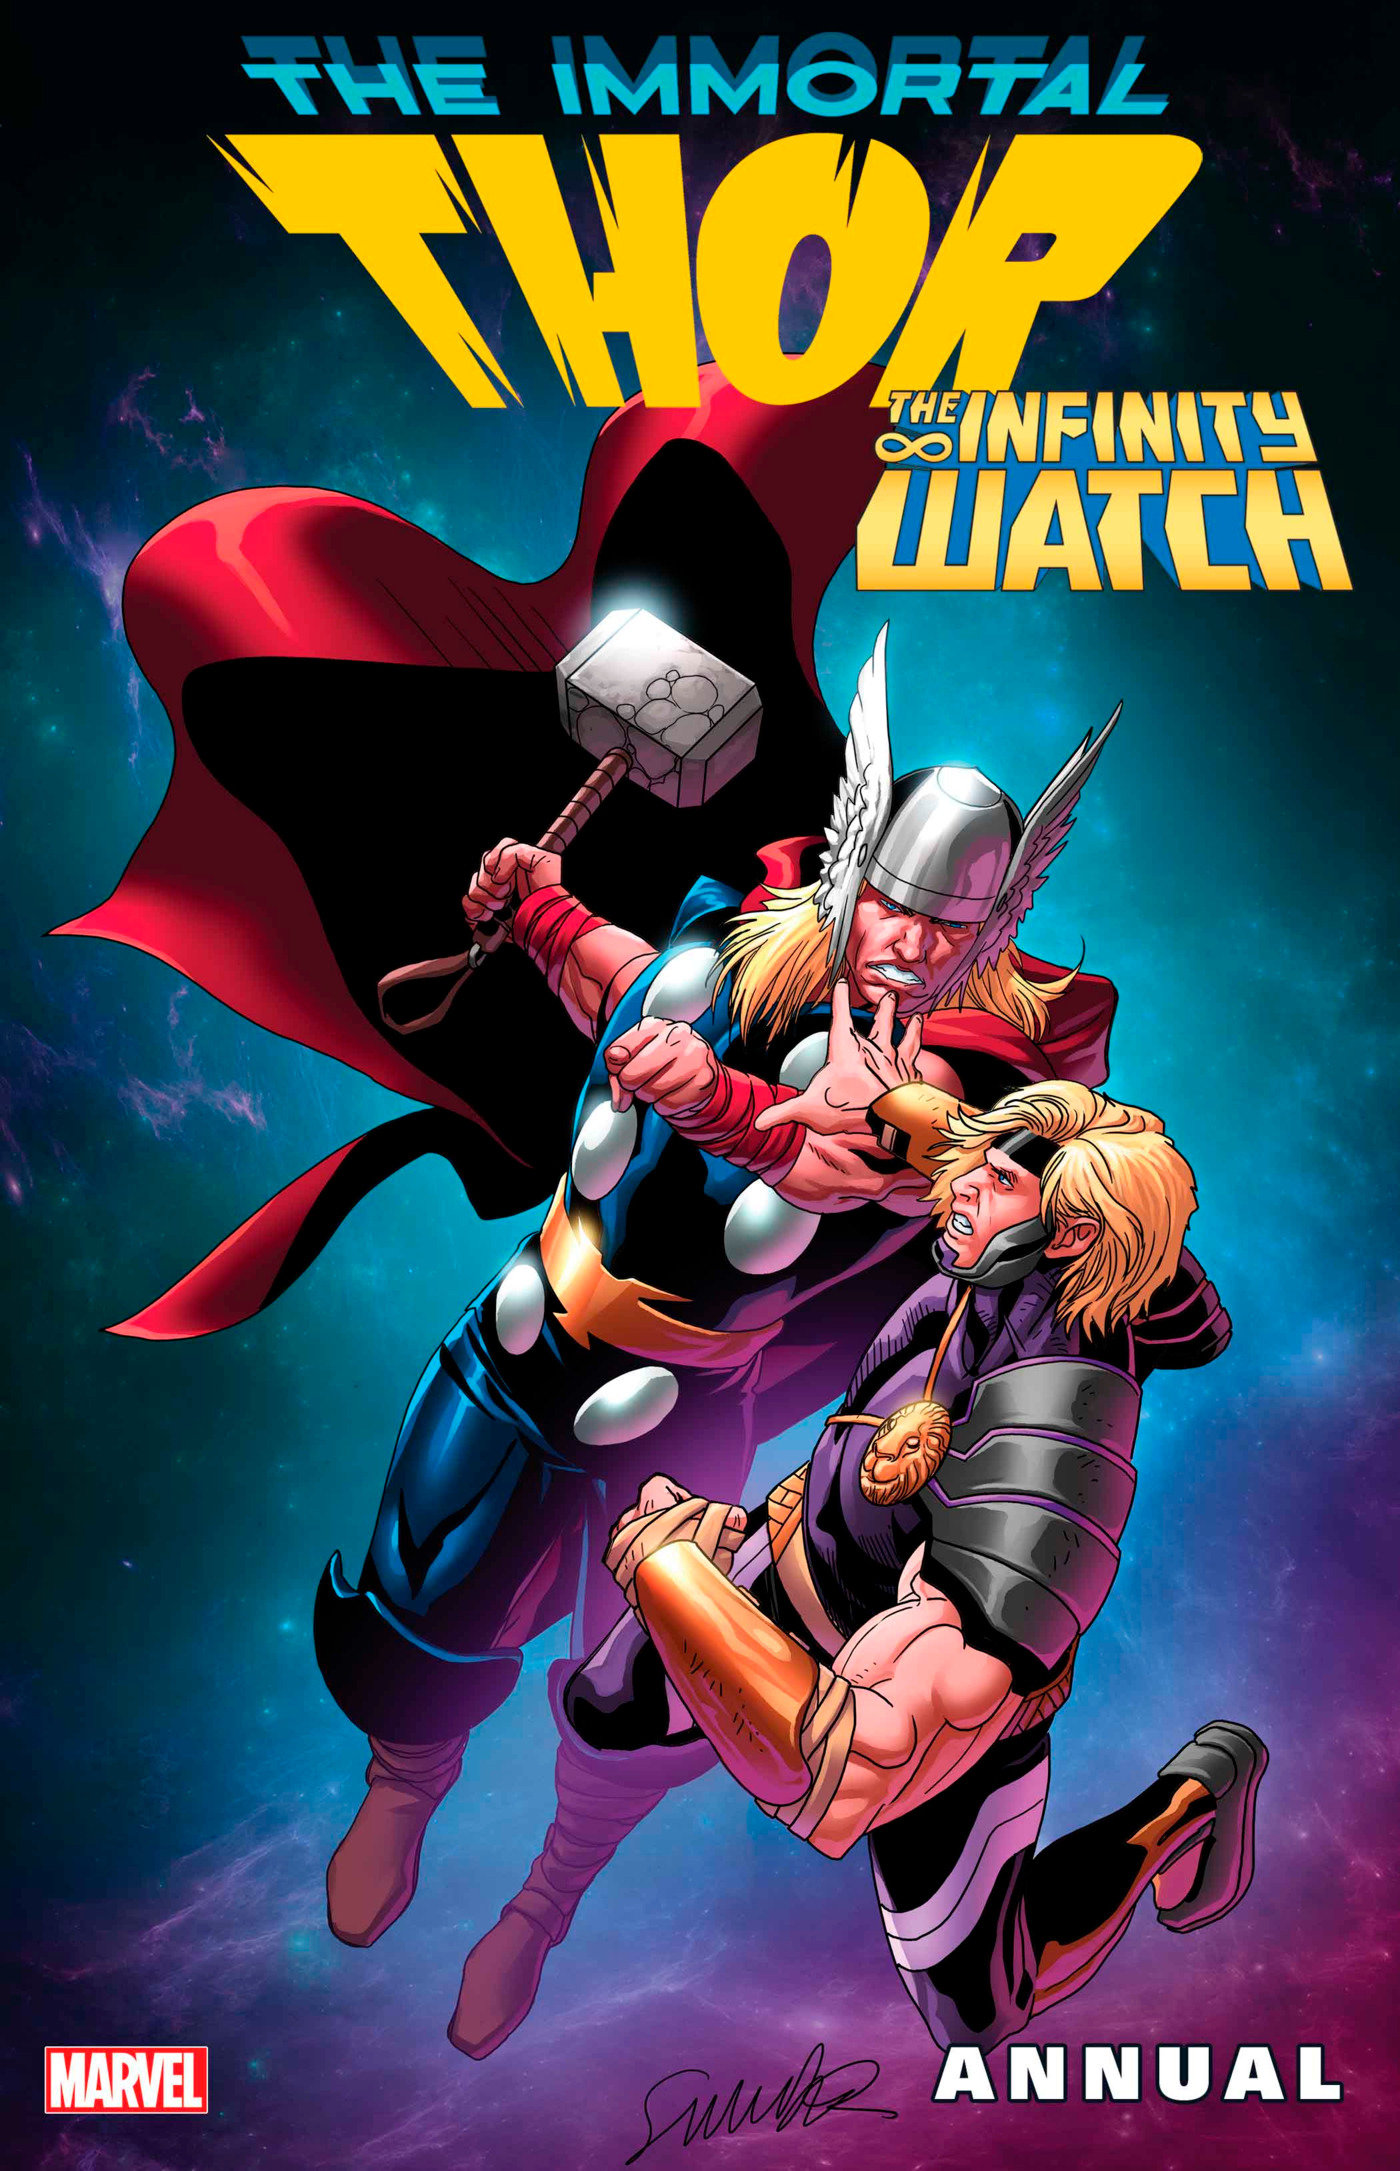 Immortal Thor Annual #1 (Infinity Watch)